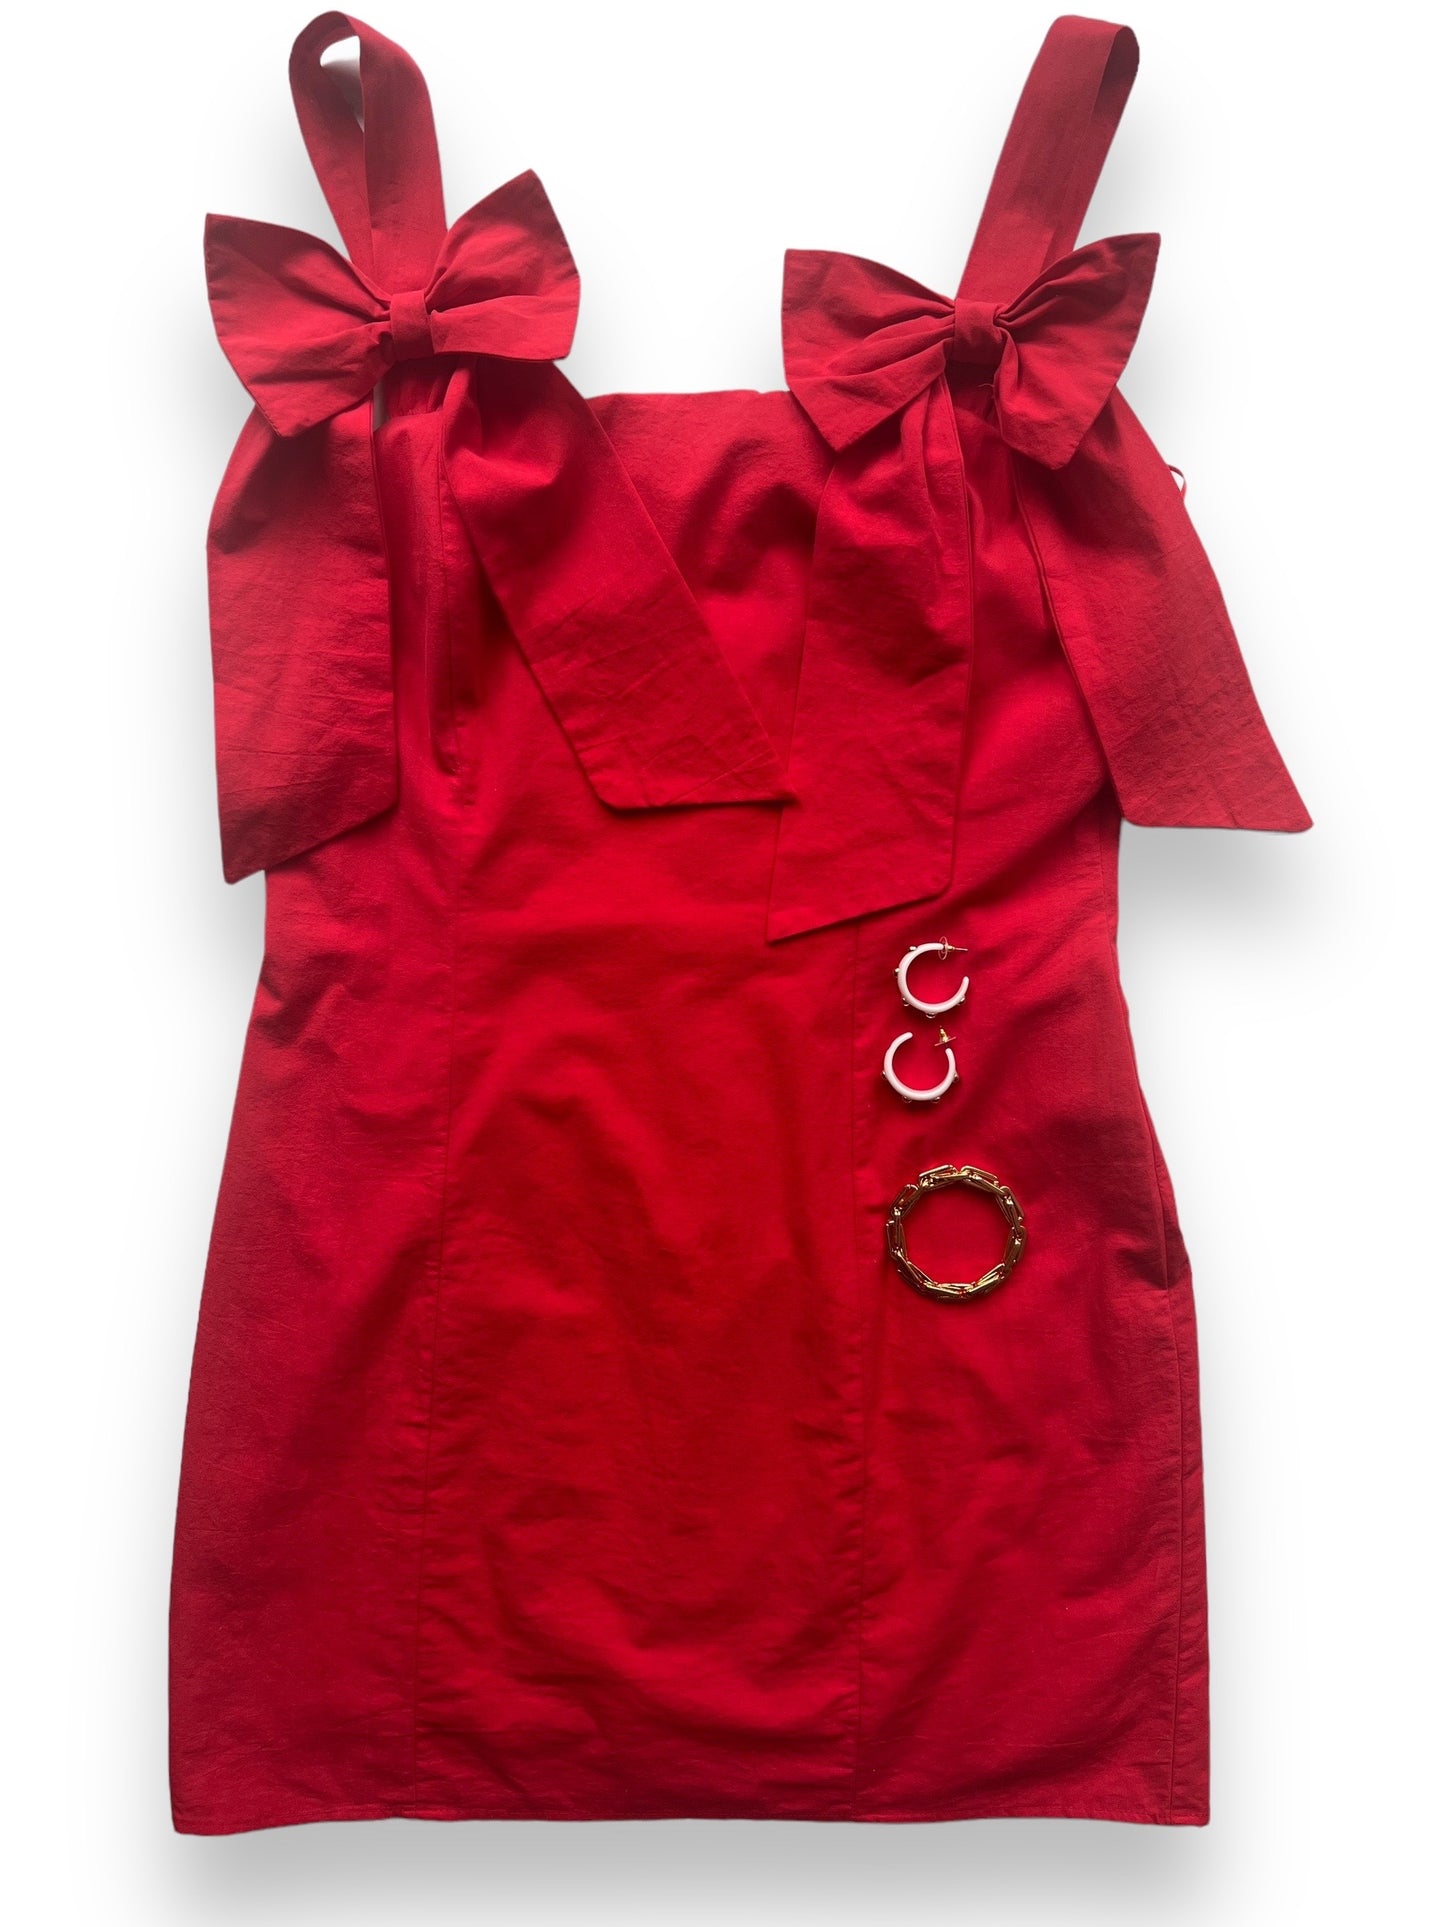 Beauty and Bows dress